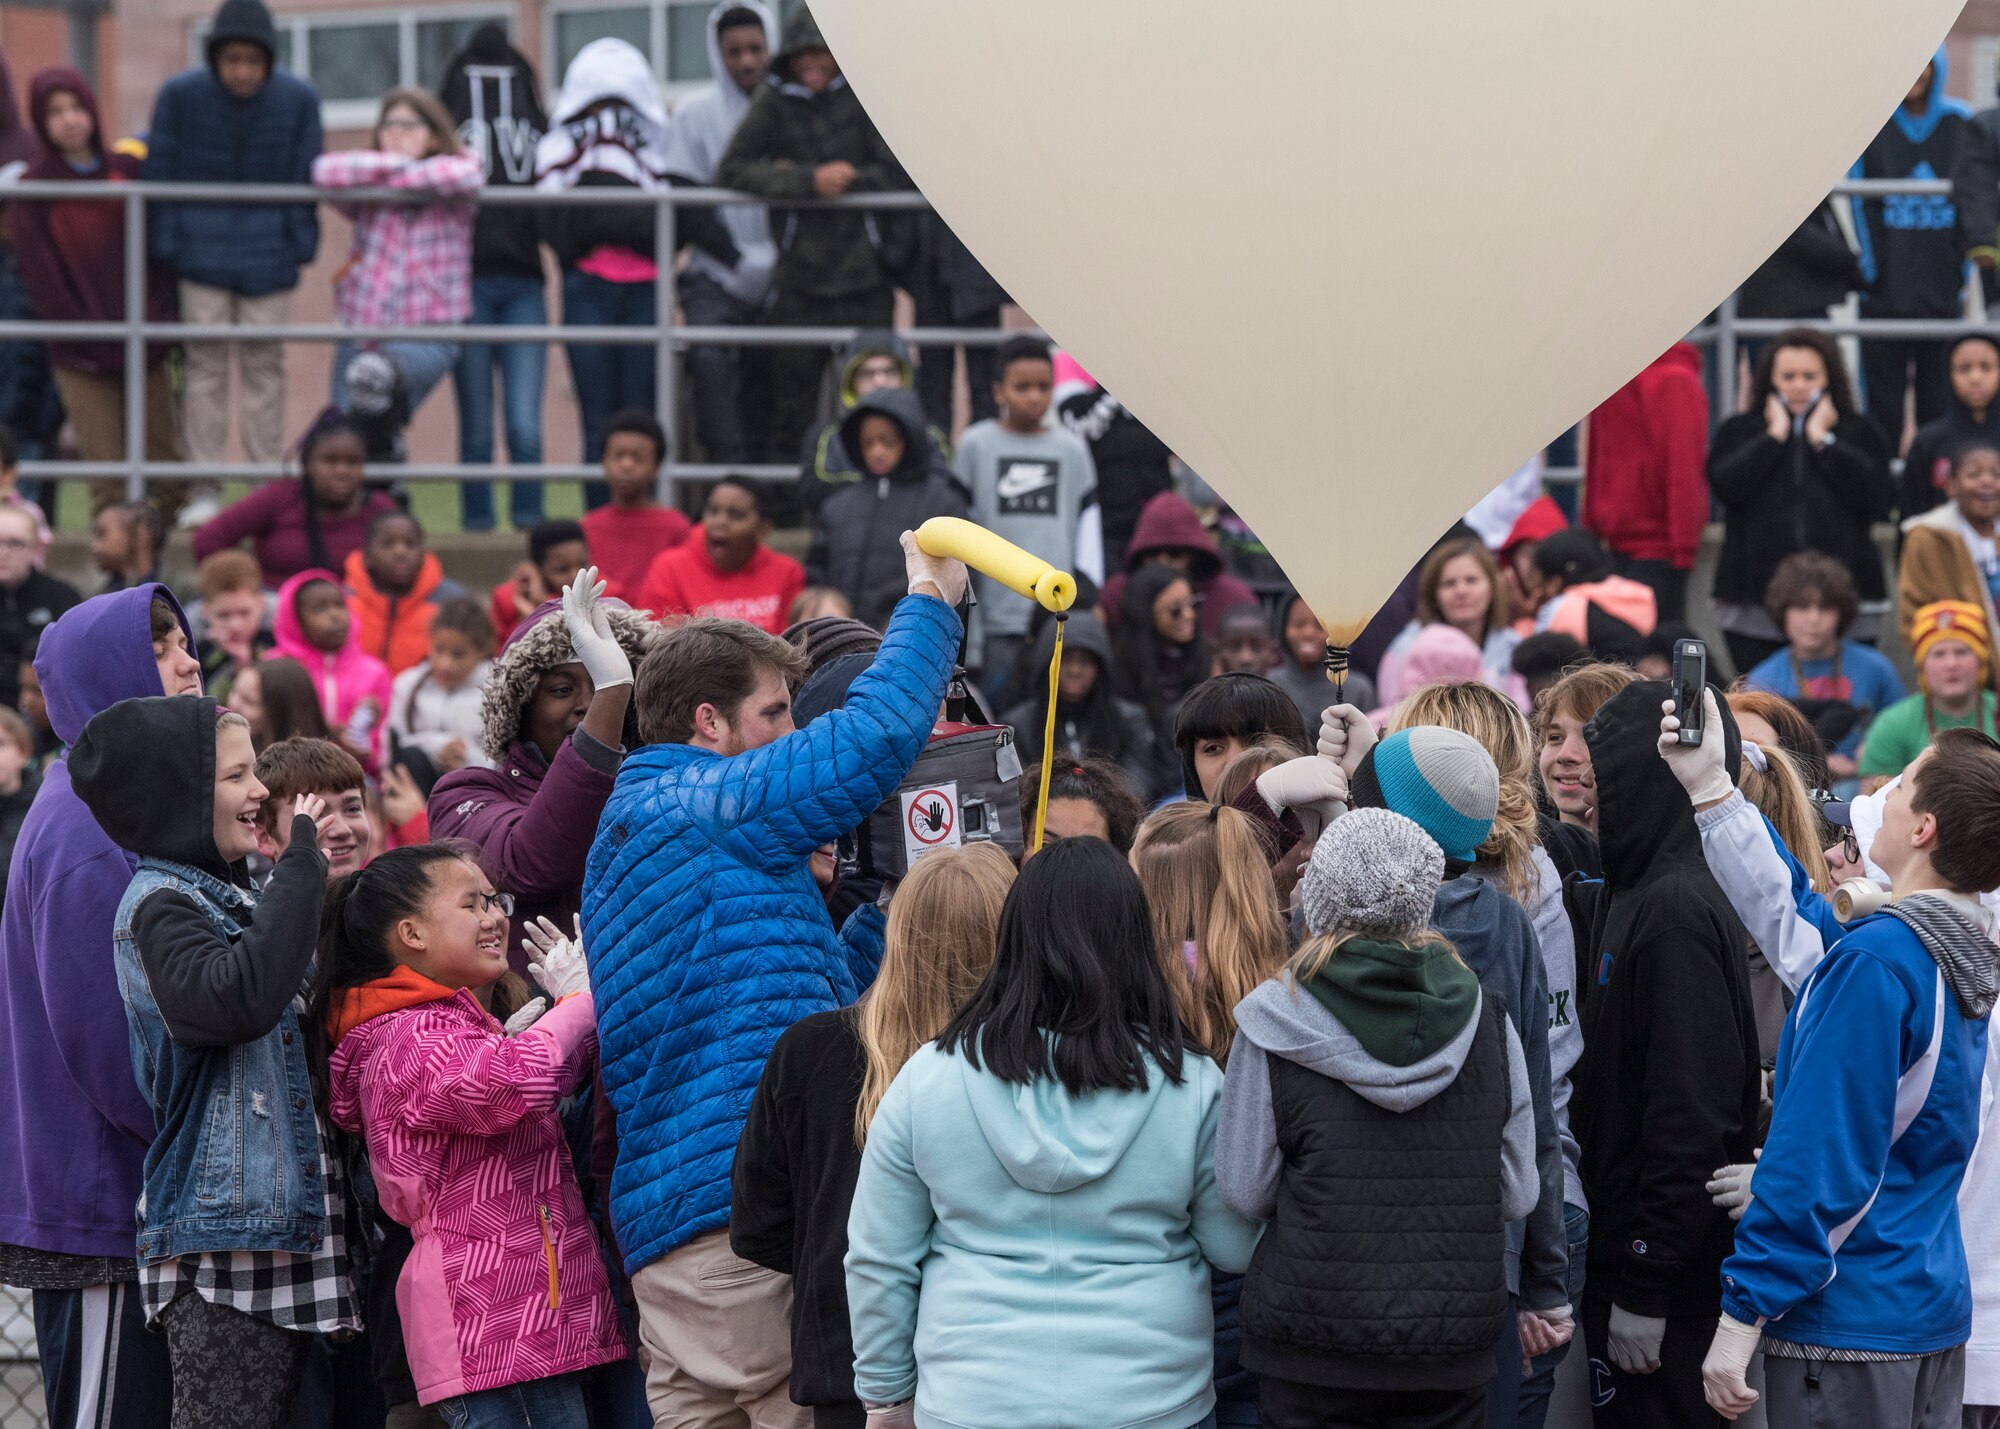 Approximately 650 students watch as eighth graders execute their year-long science, technology, engineering, and mathematics project made possible through an Air Force STEM grant, Nov. 30, 2018, Belleville, Illinois. Three schools, Emge Junior High School, Smithton Middle School and Belle Valley School, worked together to launch a balloon that carried a high-altitude computer, which analyzed data ranging from altitude and coordinates traveled to temperature and pressure. The students found the popped balloon 140 miles away in Mount Carmel, Illinois.